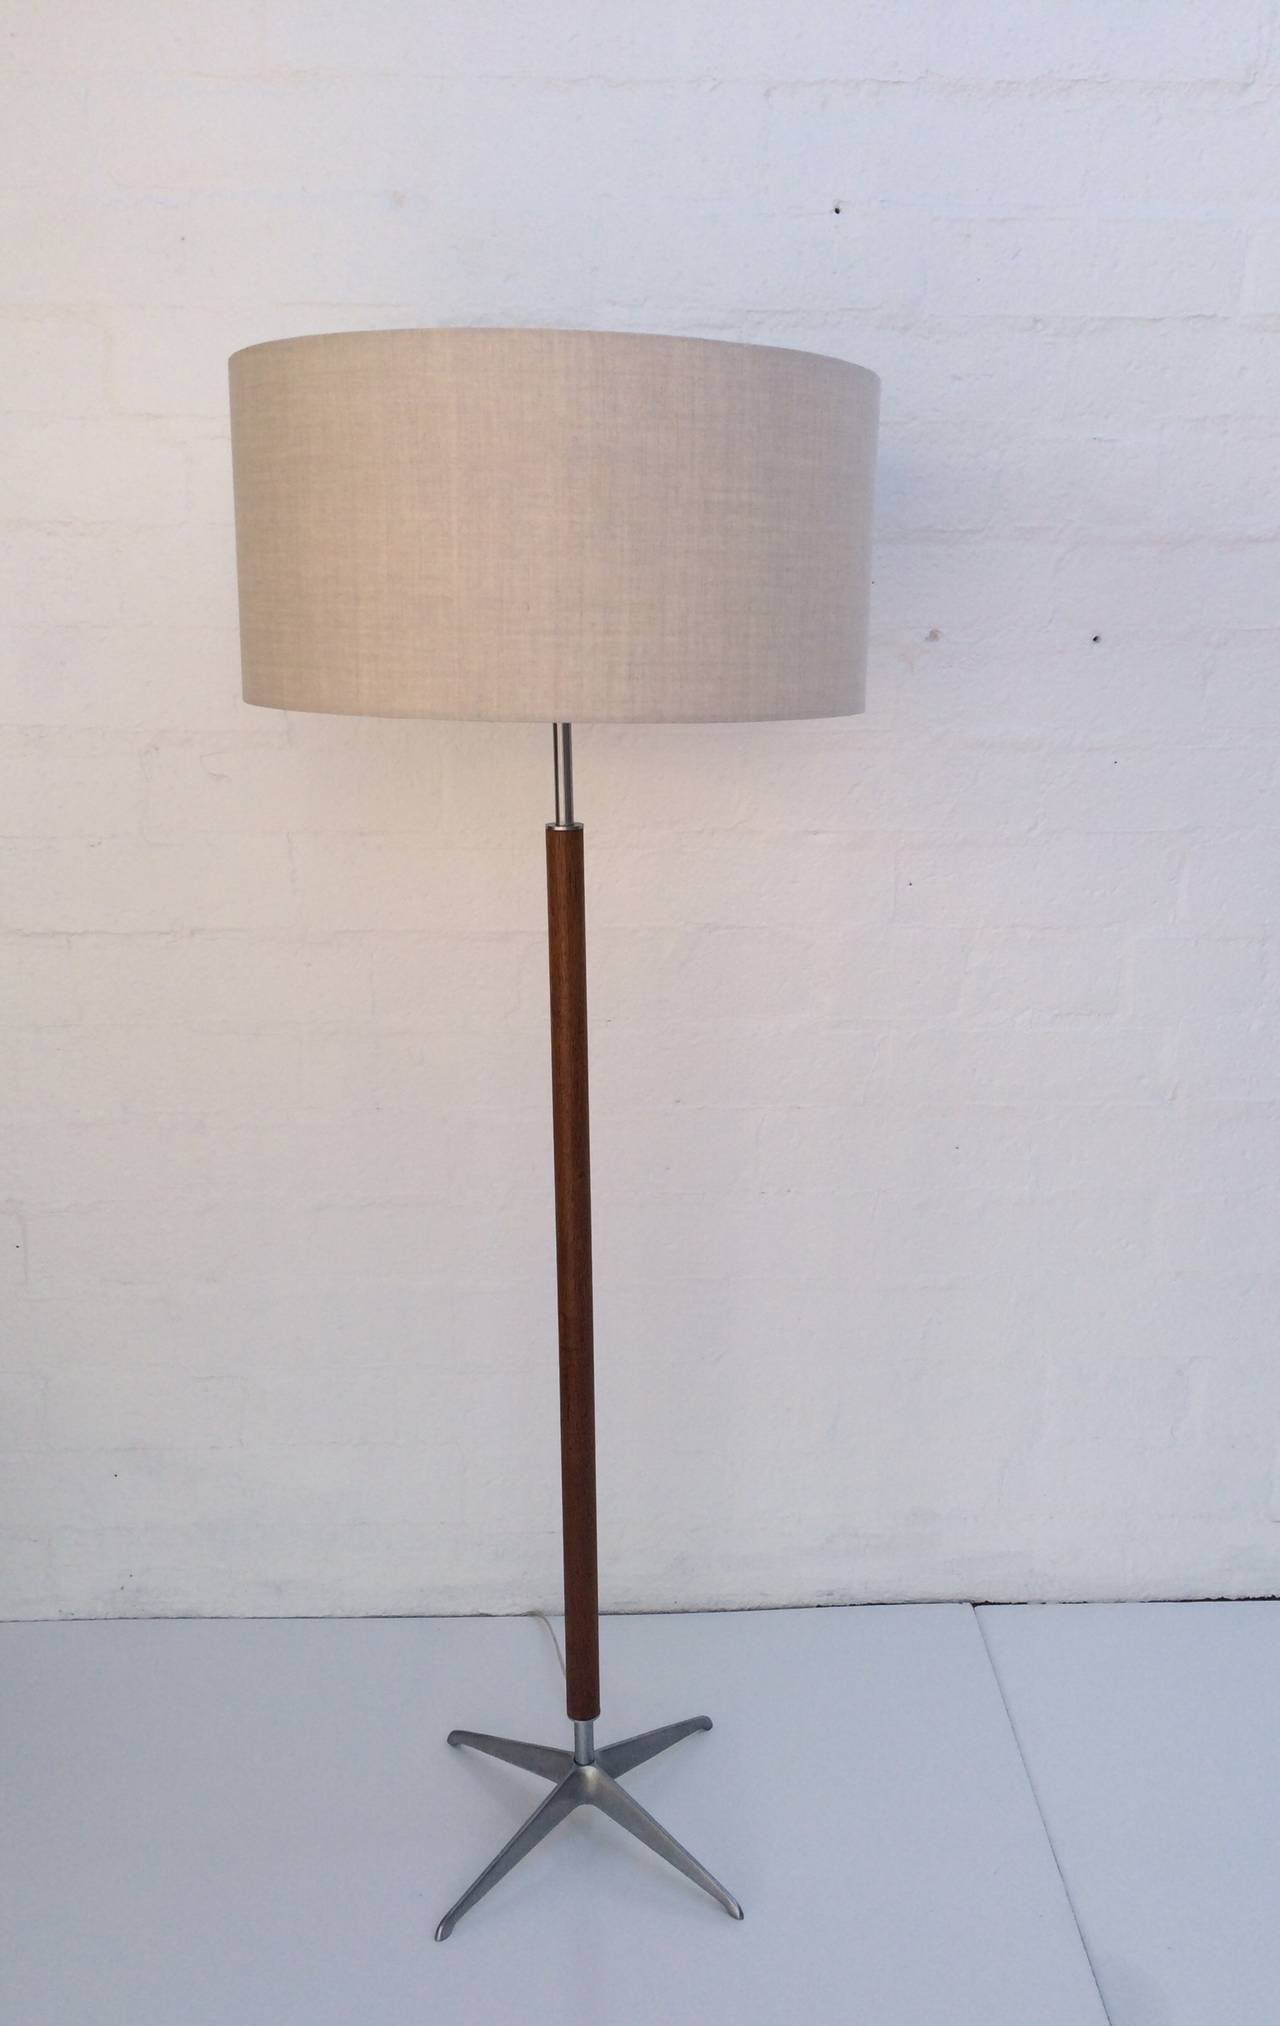 Sophisticated floor lamp designed by Gerald Thurston for Lightolier.  
Brushed aluminum and walnut. 
Newly rewired. 
New oatmeal colored linen shade.